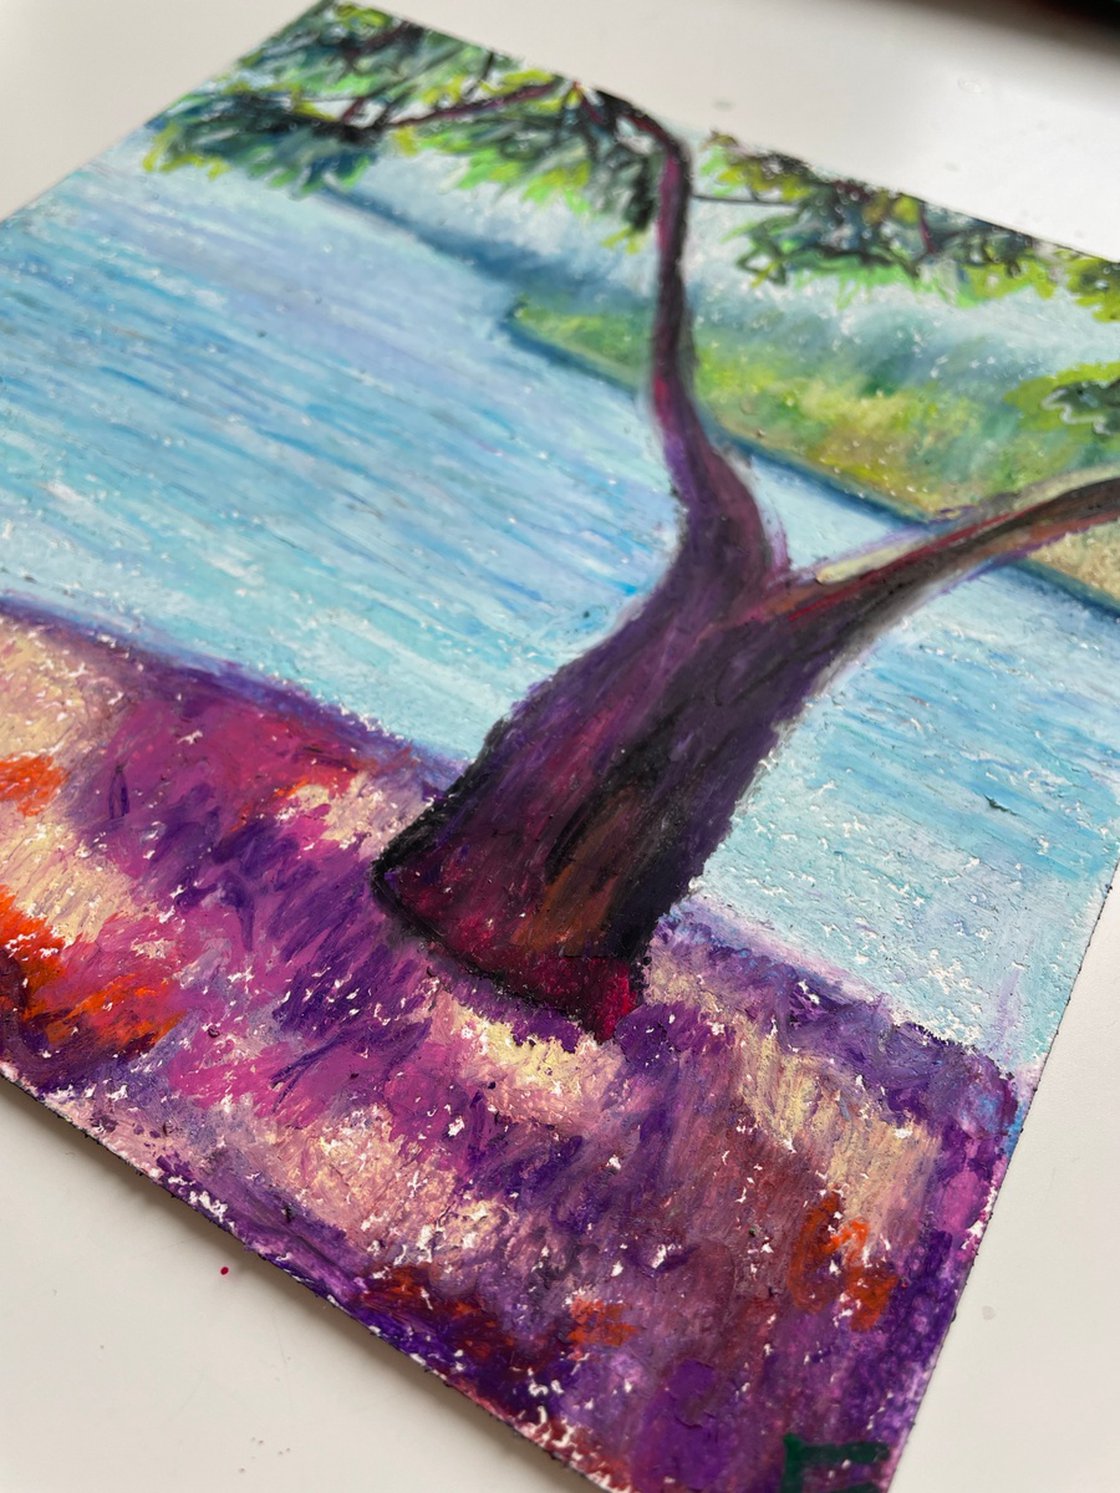 Seaside. Oil pastels on watercolor paper and my first oil pastel drawing  (painting?). Came out nicely impressionistic but details i hoped for were  too tough to achieve. I'm happy with it anyway